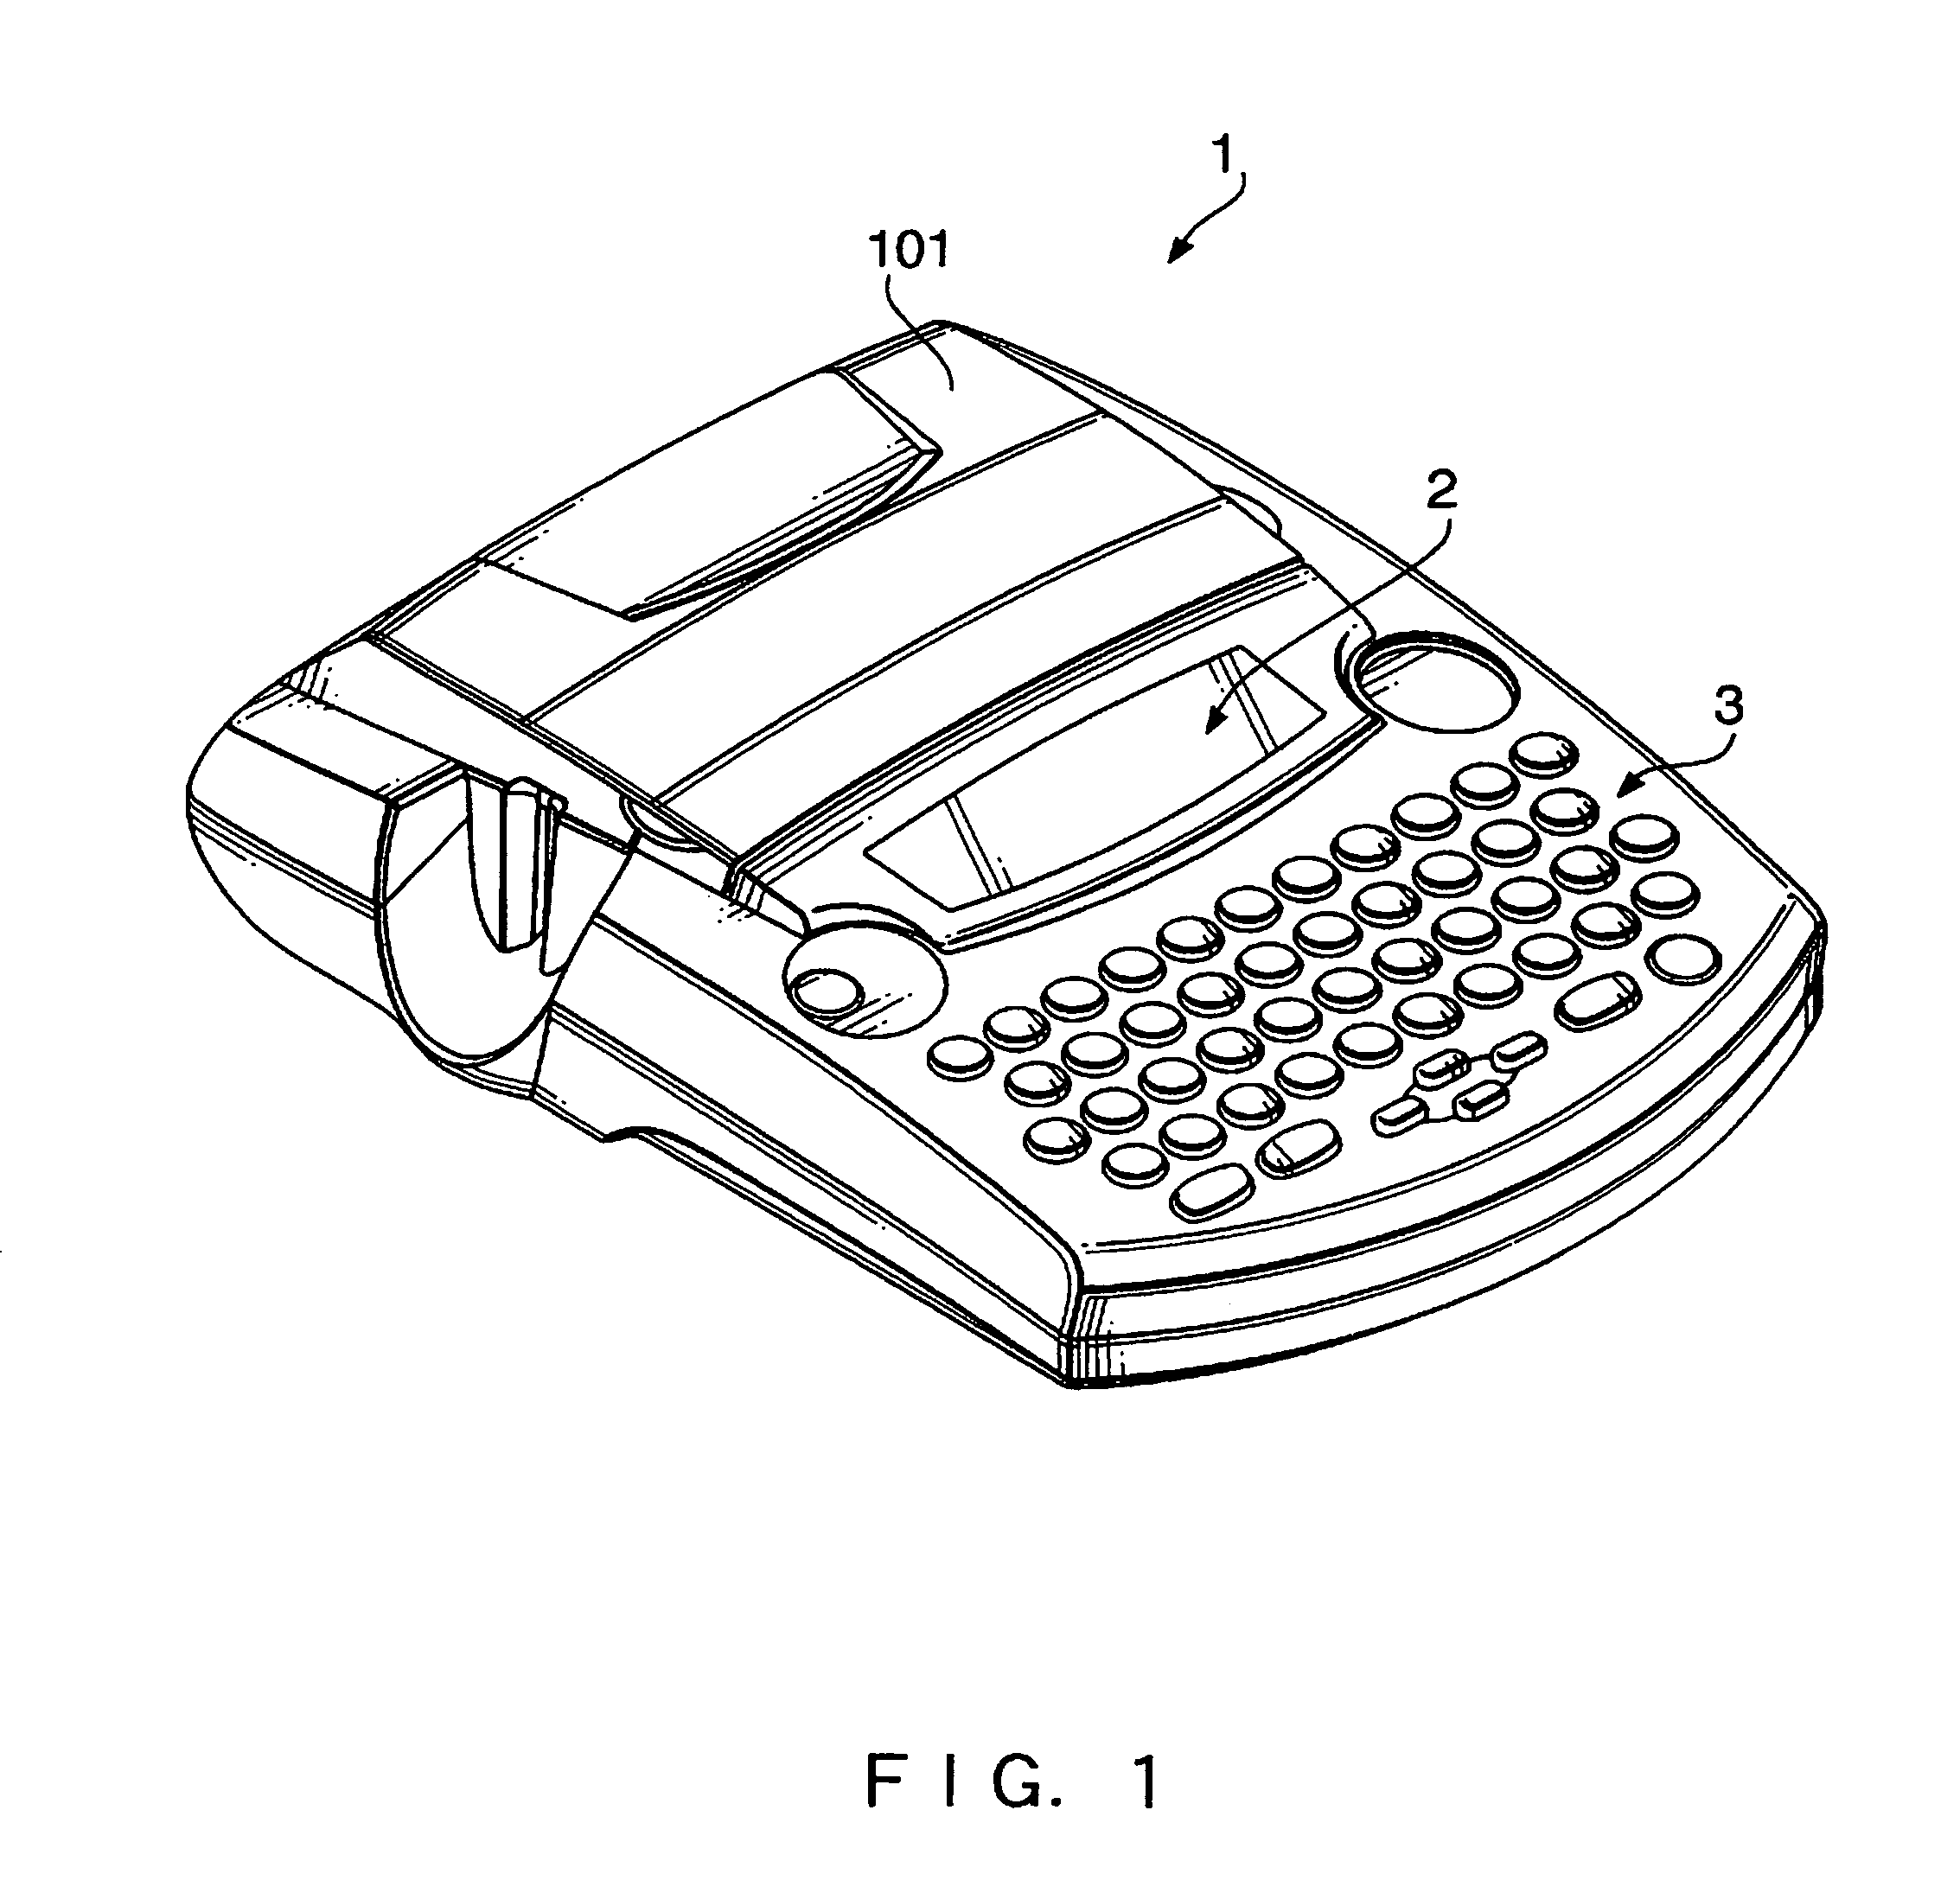 Tape printing control device and program